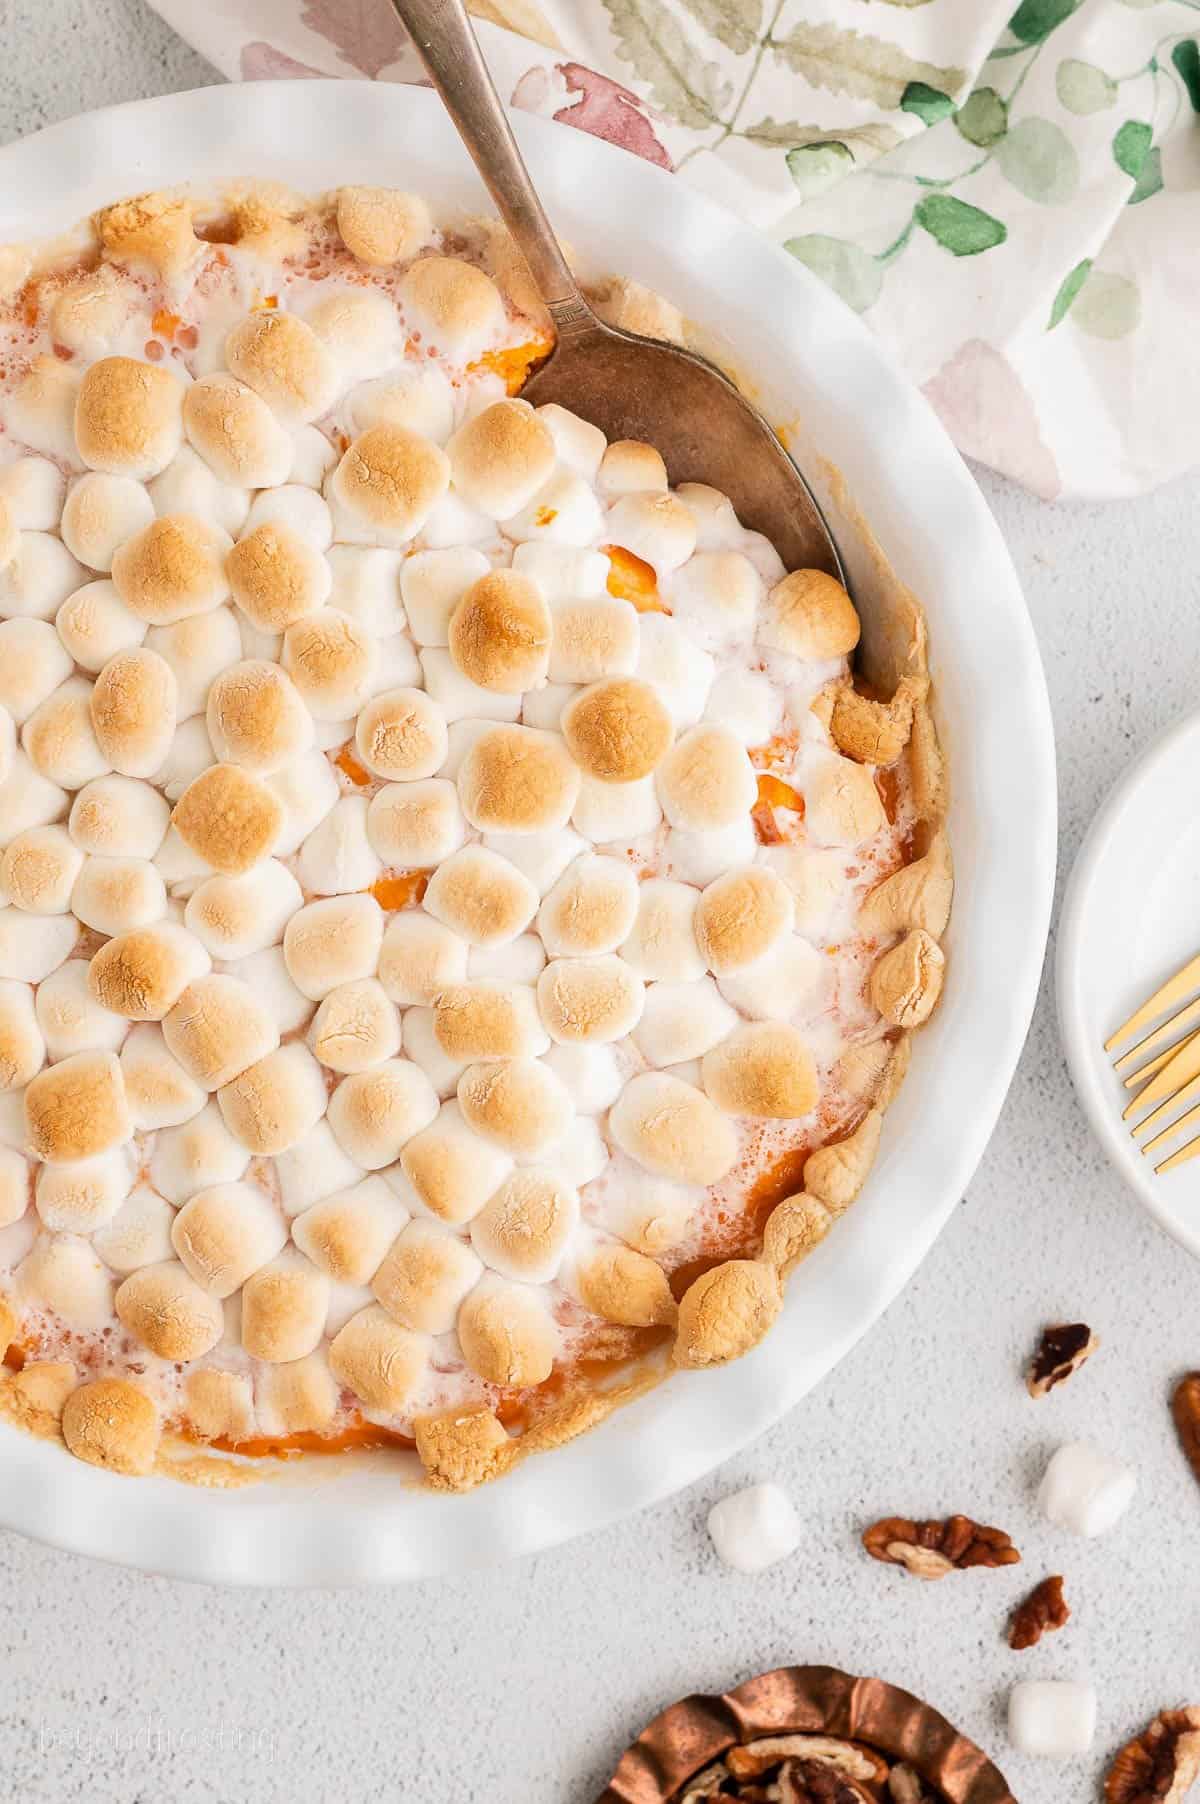 Baked sweet potato casserole with browned mini marshmallows on top.